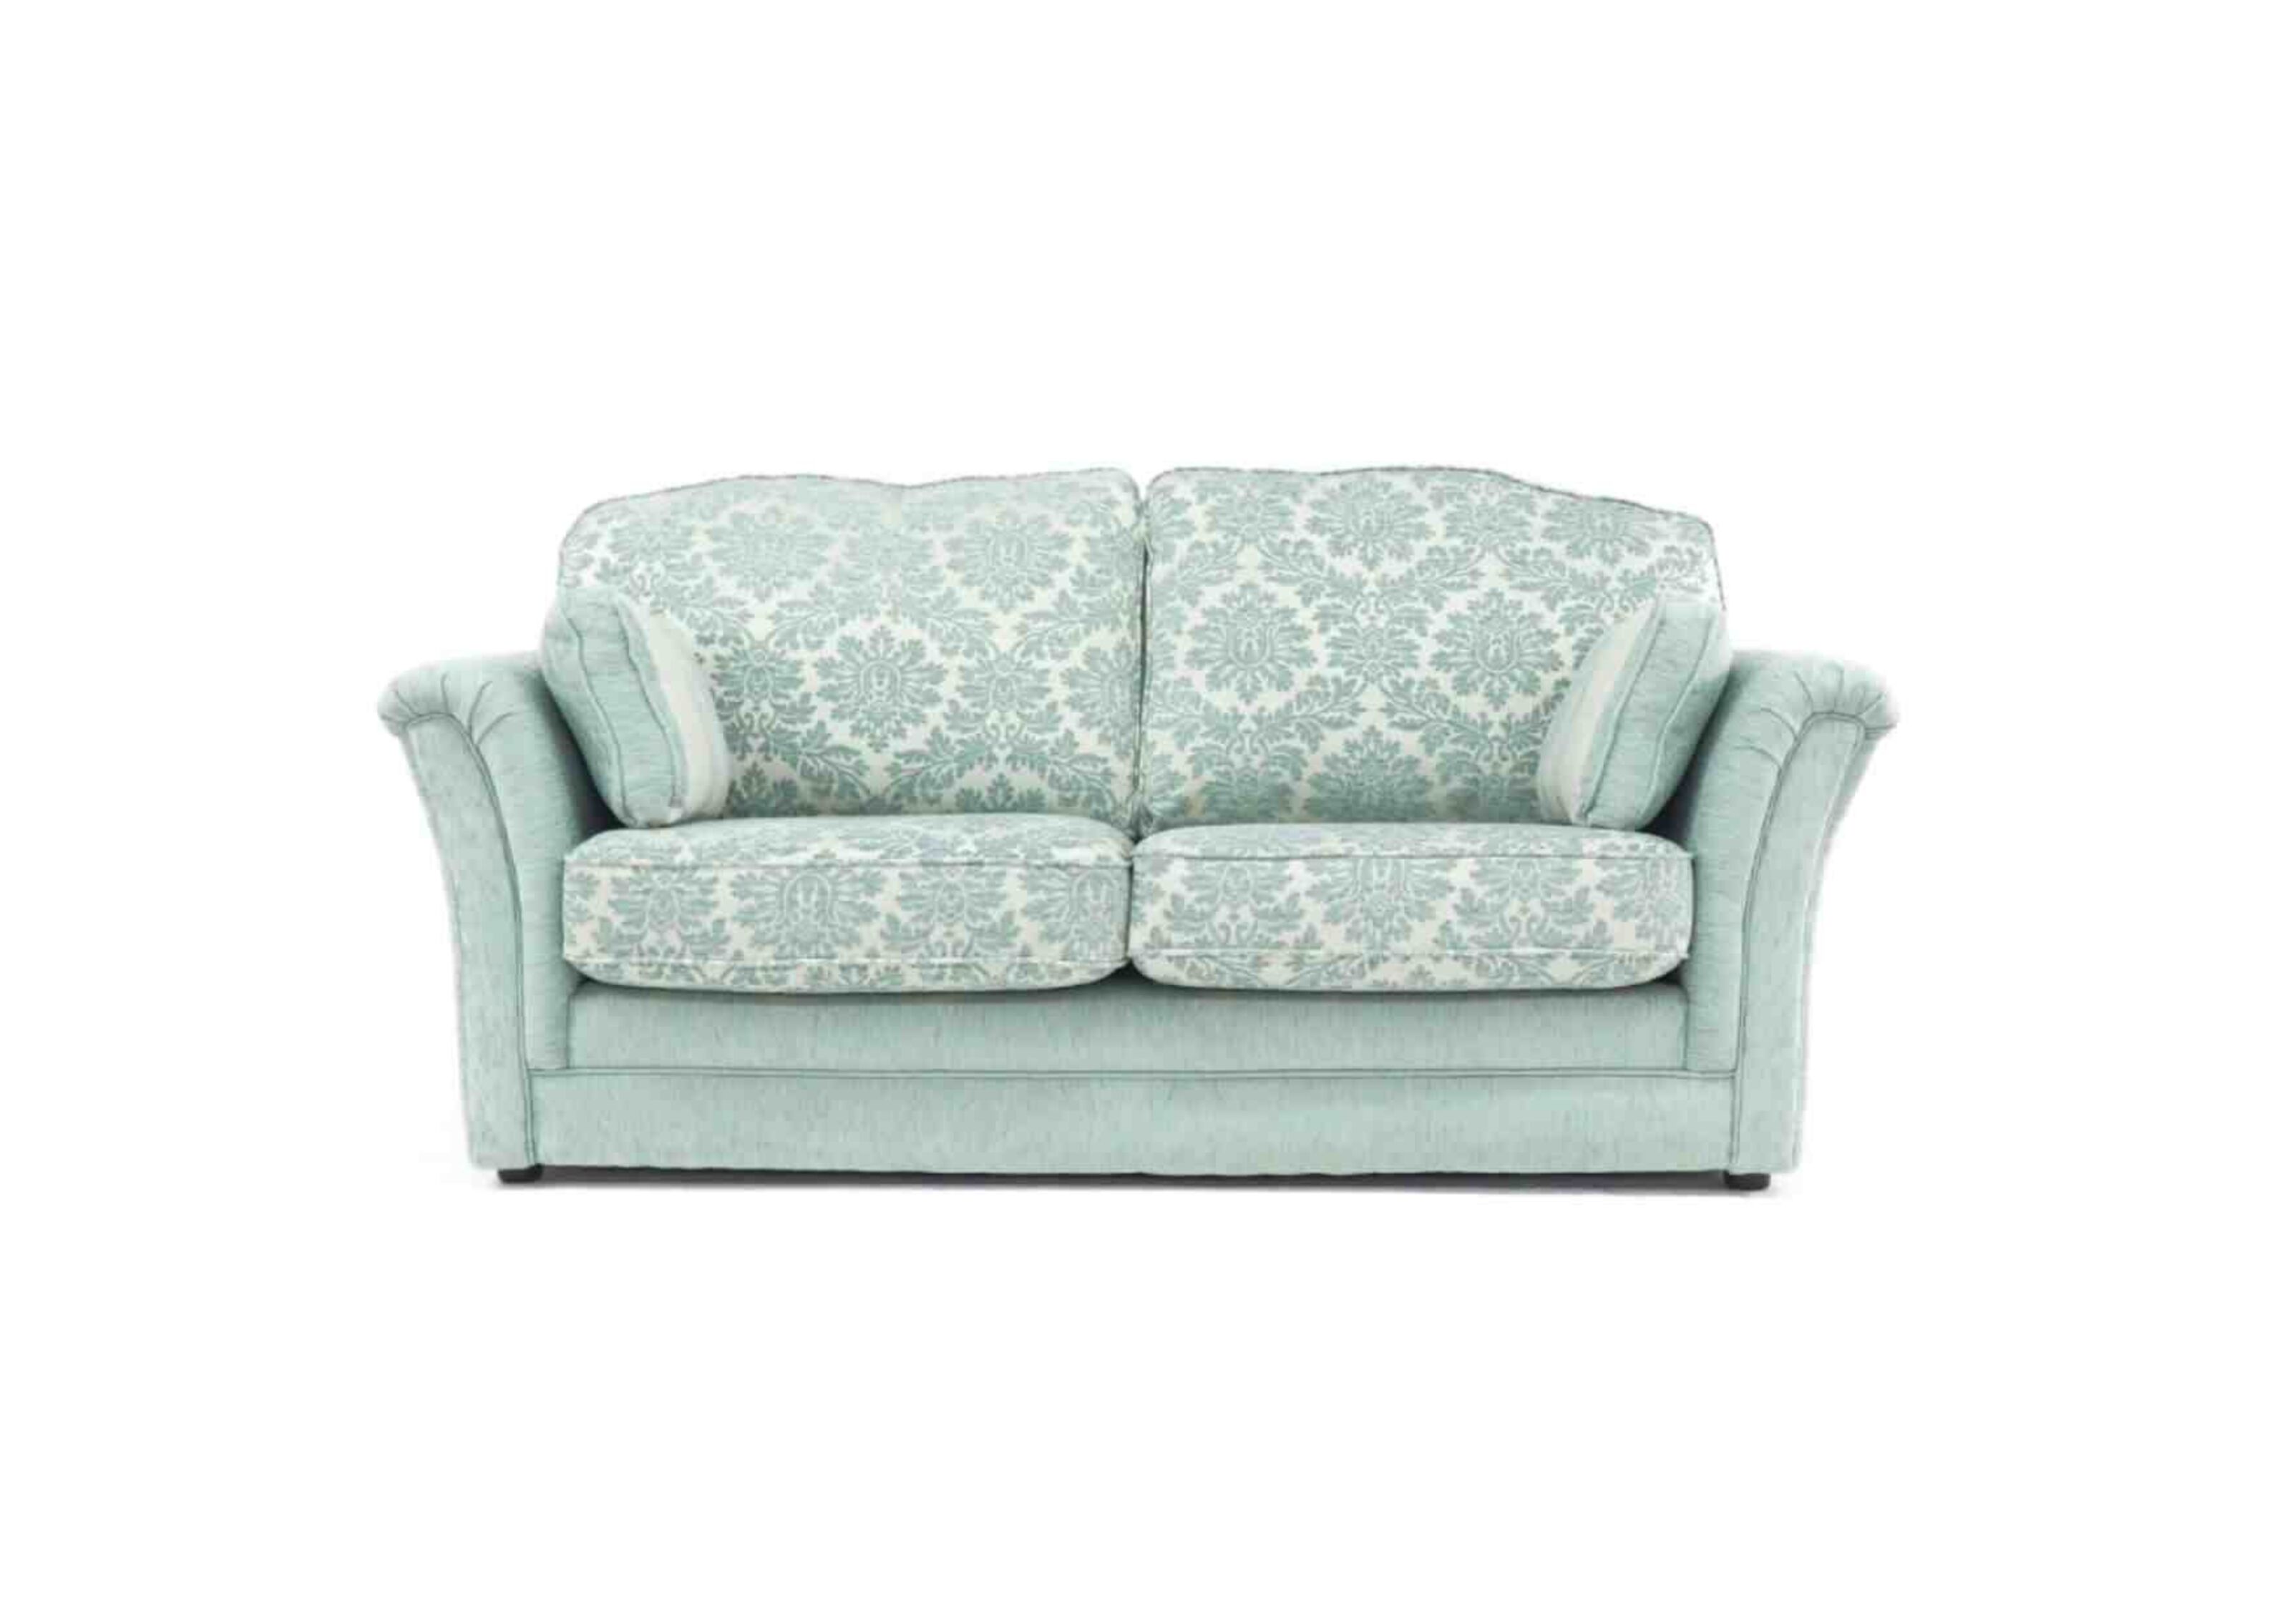 Discover Premium Chesterfield Sofas in JB  %Post Title